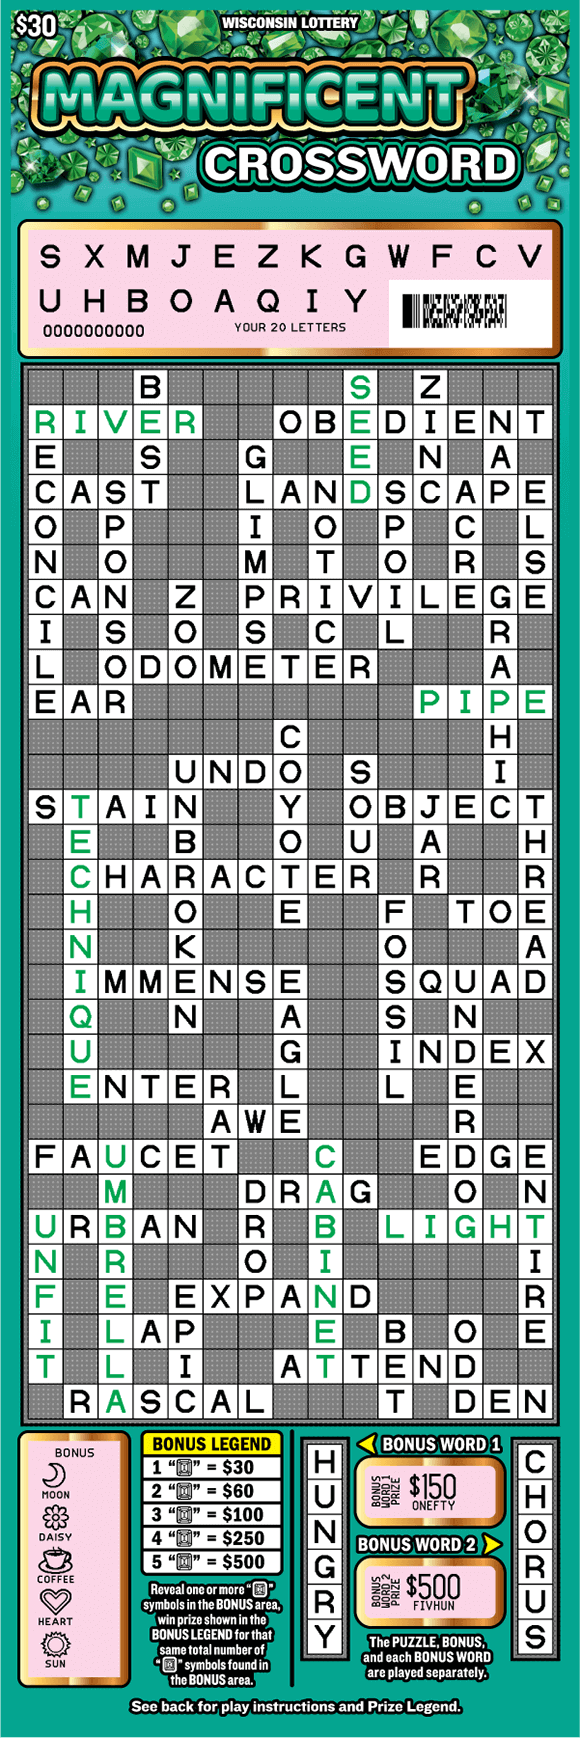 assortment of green jewels on teal background with tall scratched white crossword puzzle and icons of golden pots filled with green gems on scratch ticket